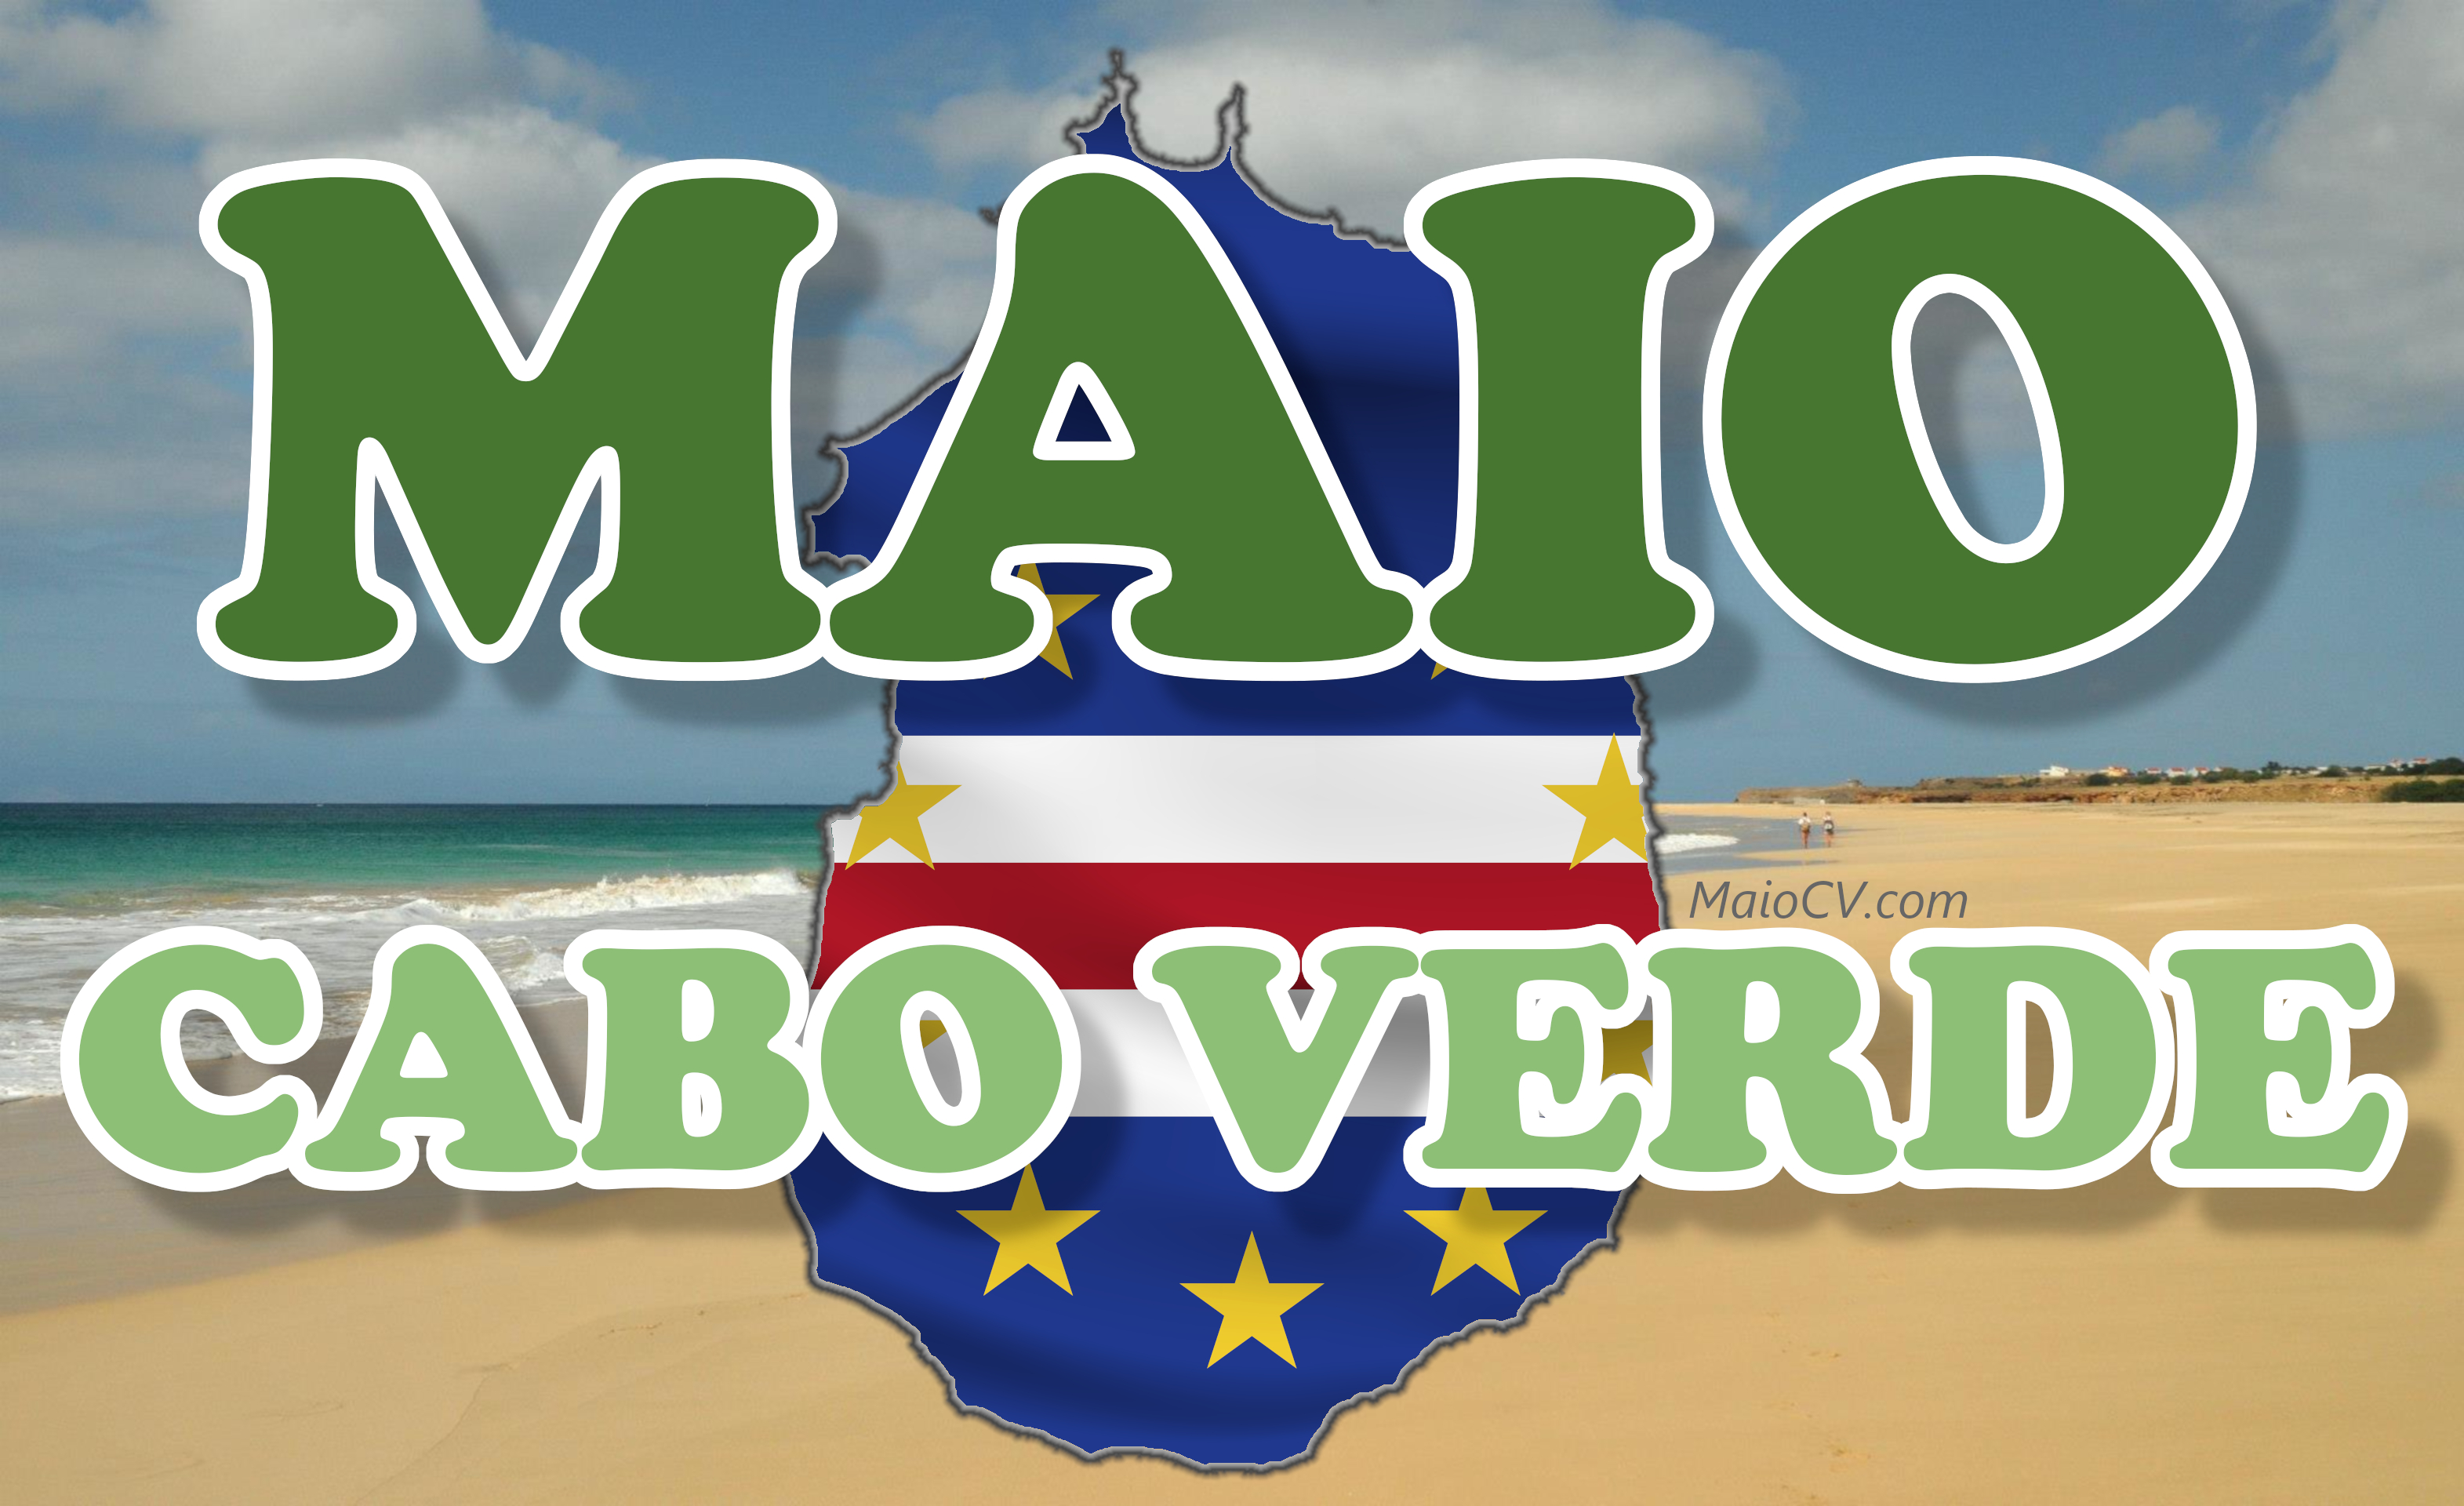  Cabo Verde Government approves “Green Card” for foreigners who buy real estate property